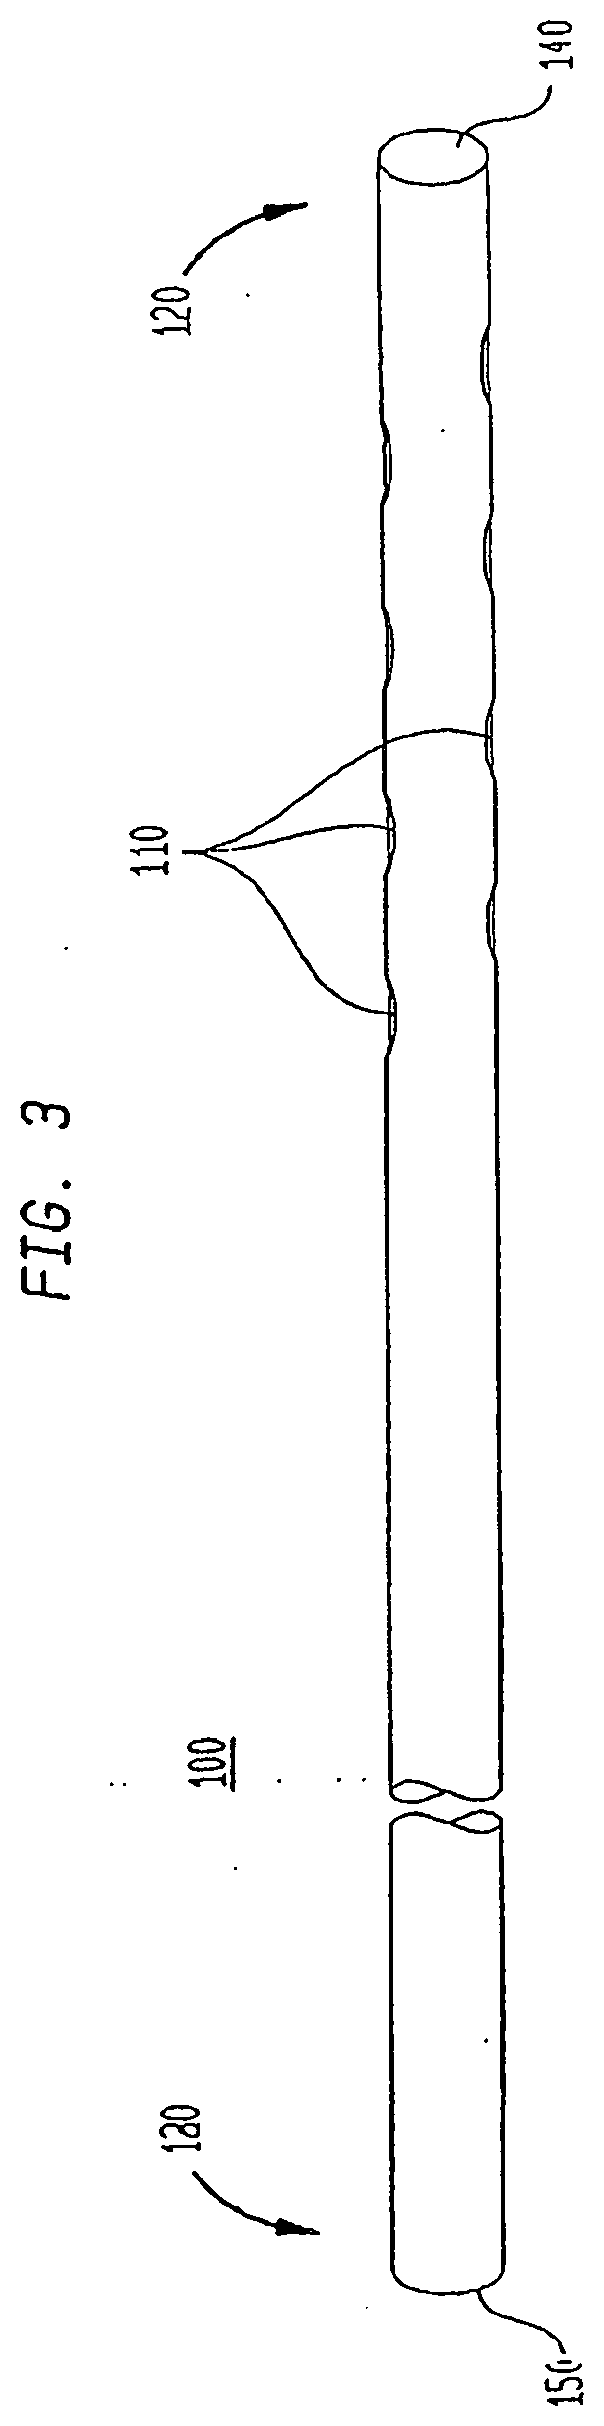 Lasso filter tipped microcatheter for simultaneous rotating separator, irrigator for thrombectomy and method for use